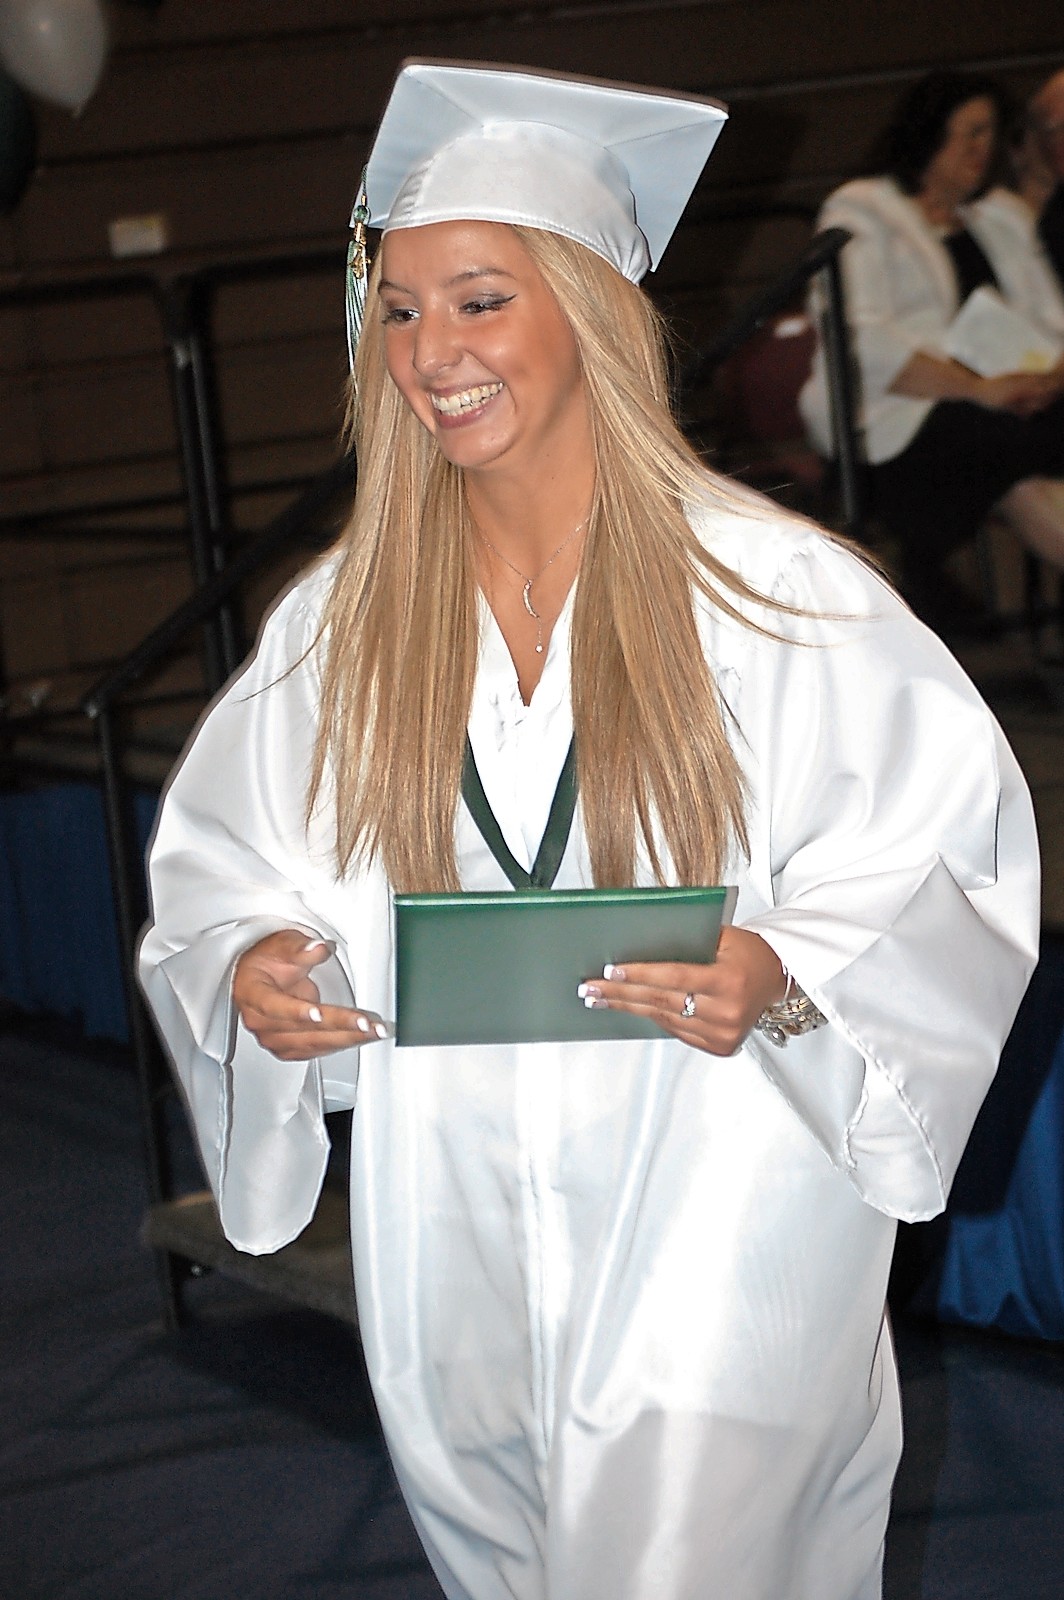 Alyssa Lombardo was a proud member of the class of 2016.